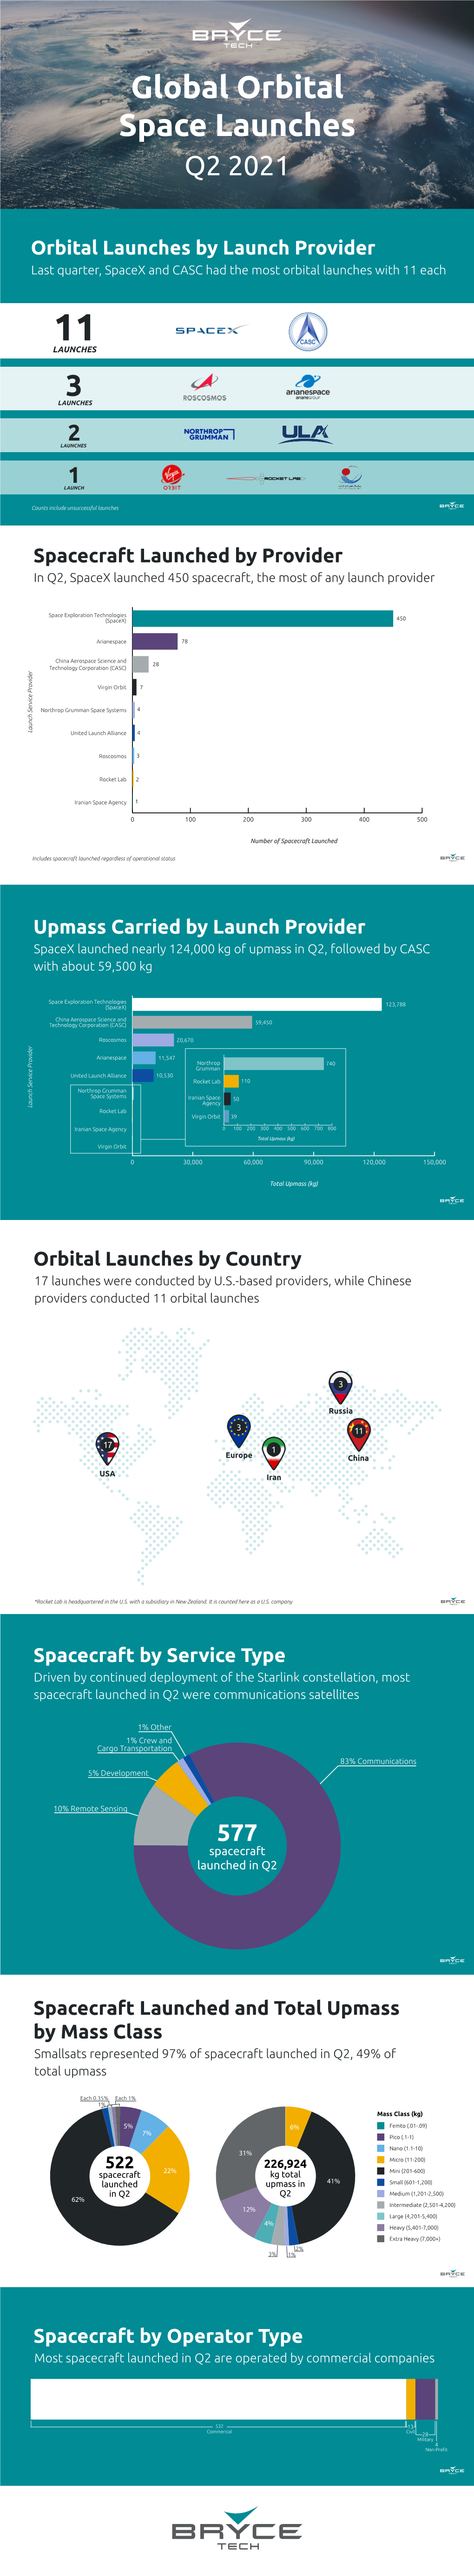 Global Orbital Space Launches Q2 2021